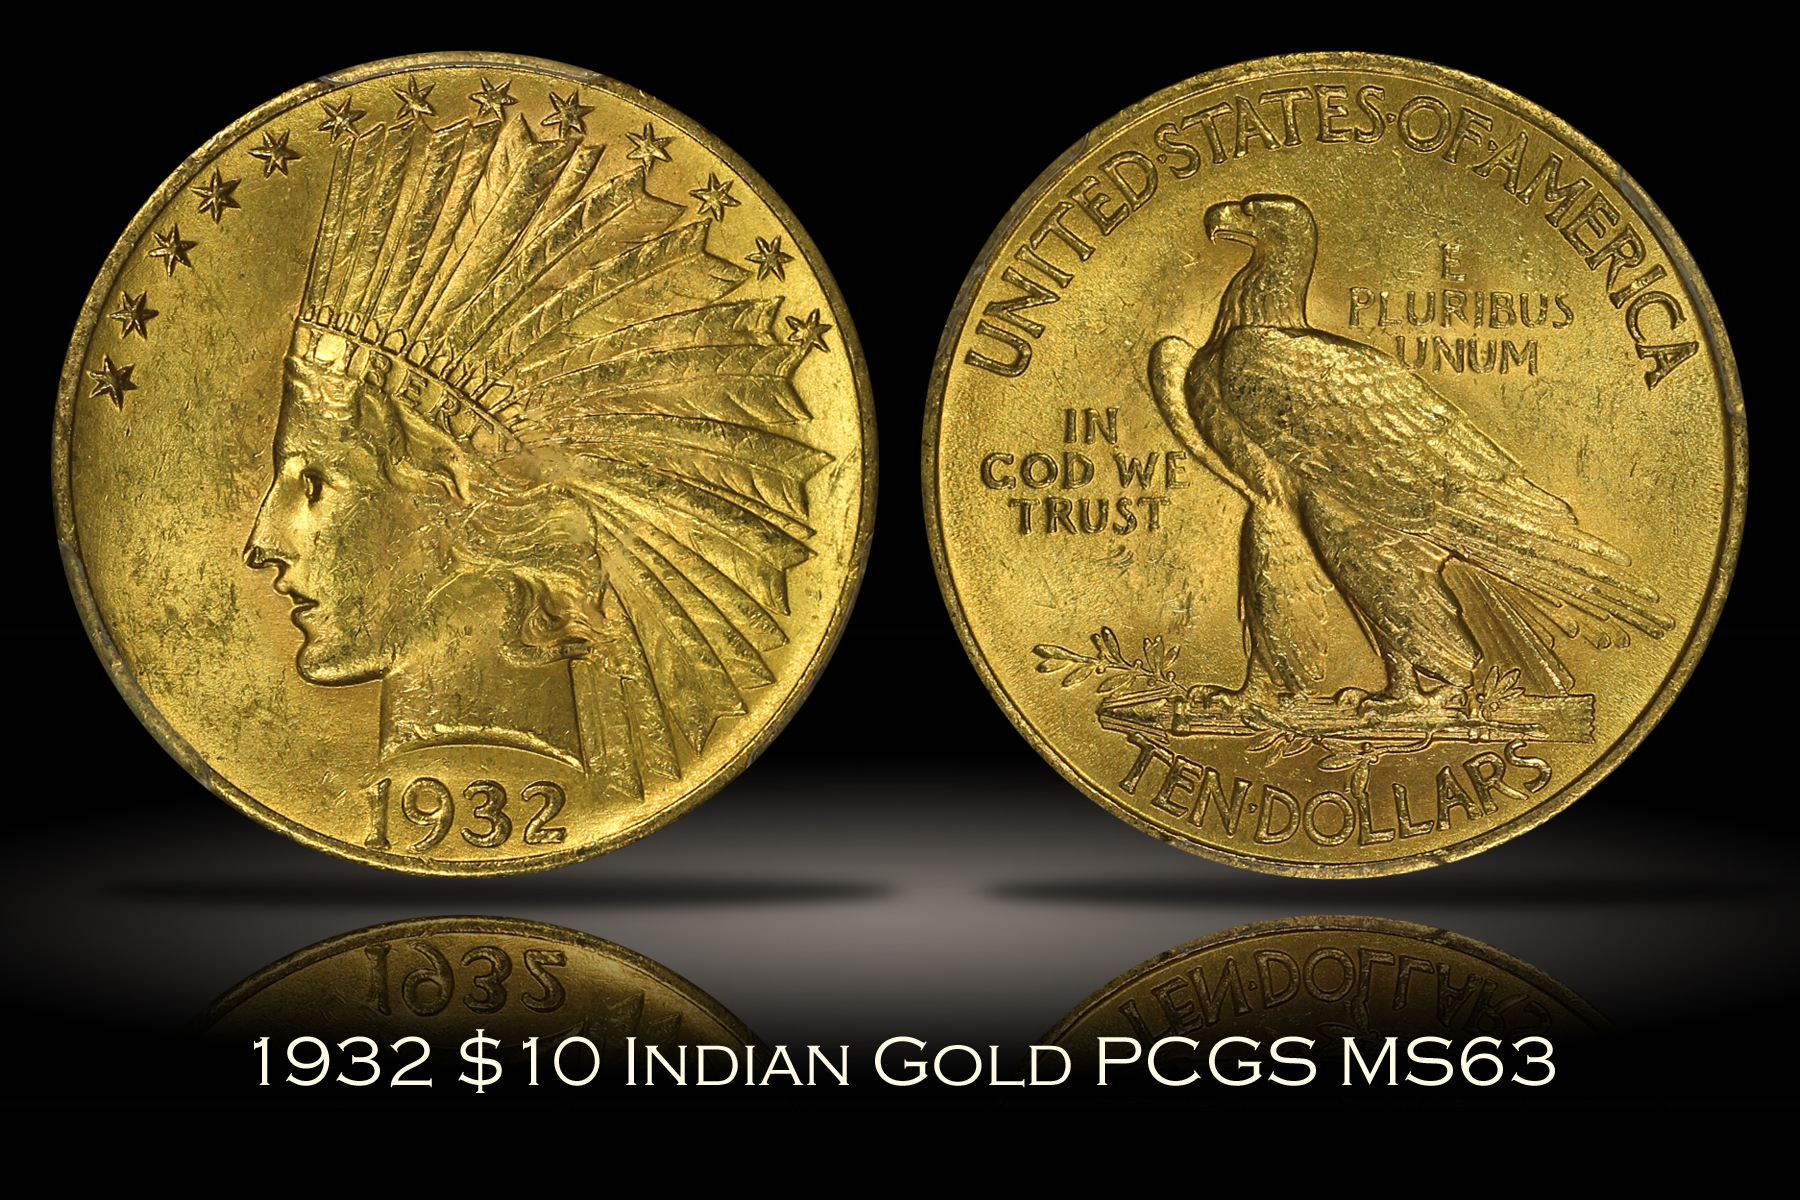 1932 $10 Indian Gold PCGS MS63